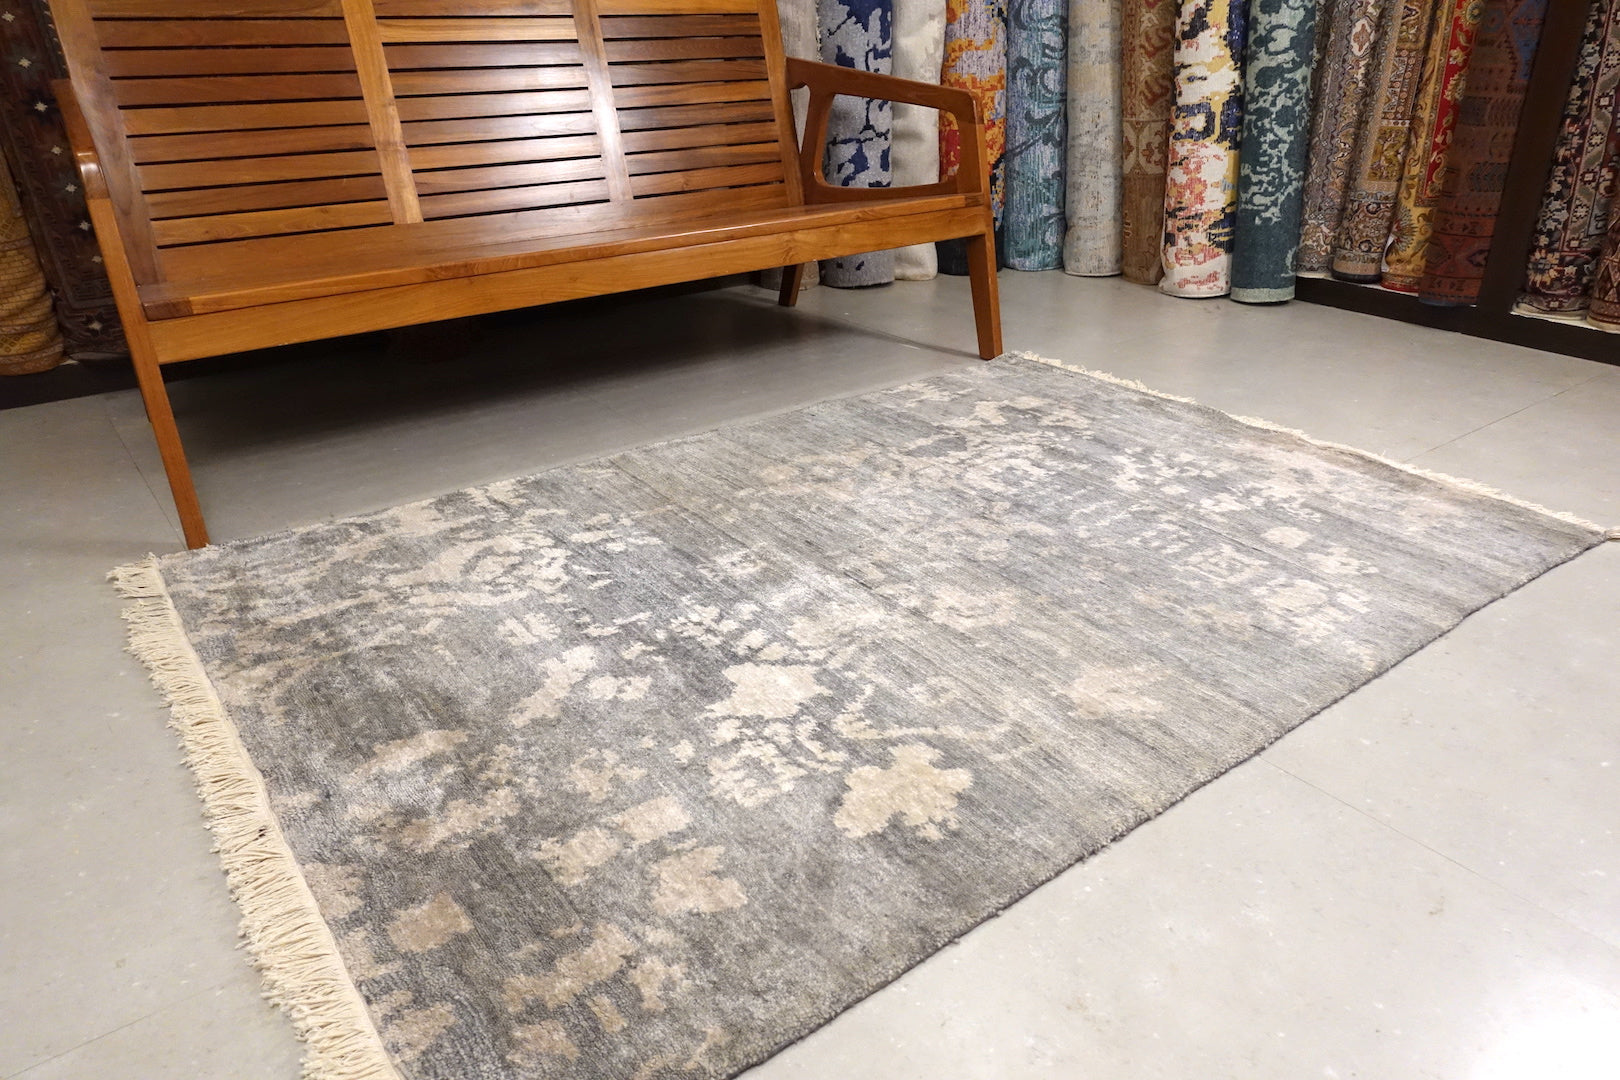 This 4 feet by 6 feet rug is an abstract floral design with pastel shades. The colours are gray and white.